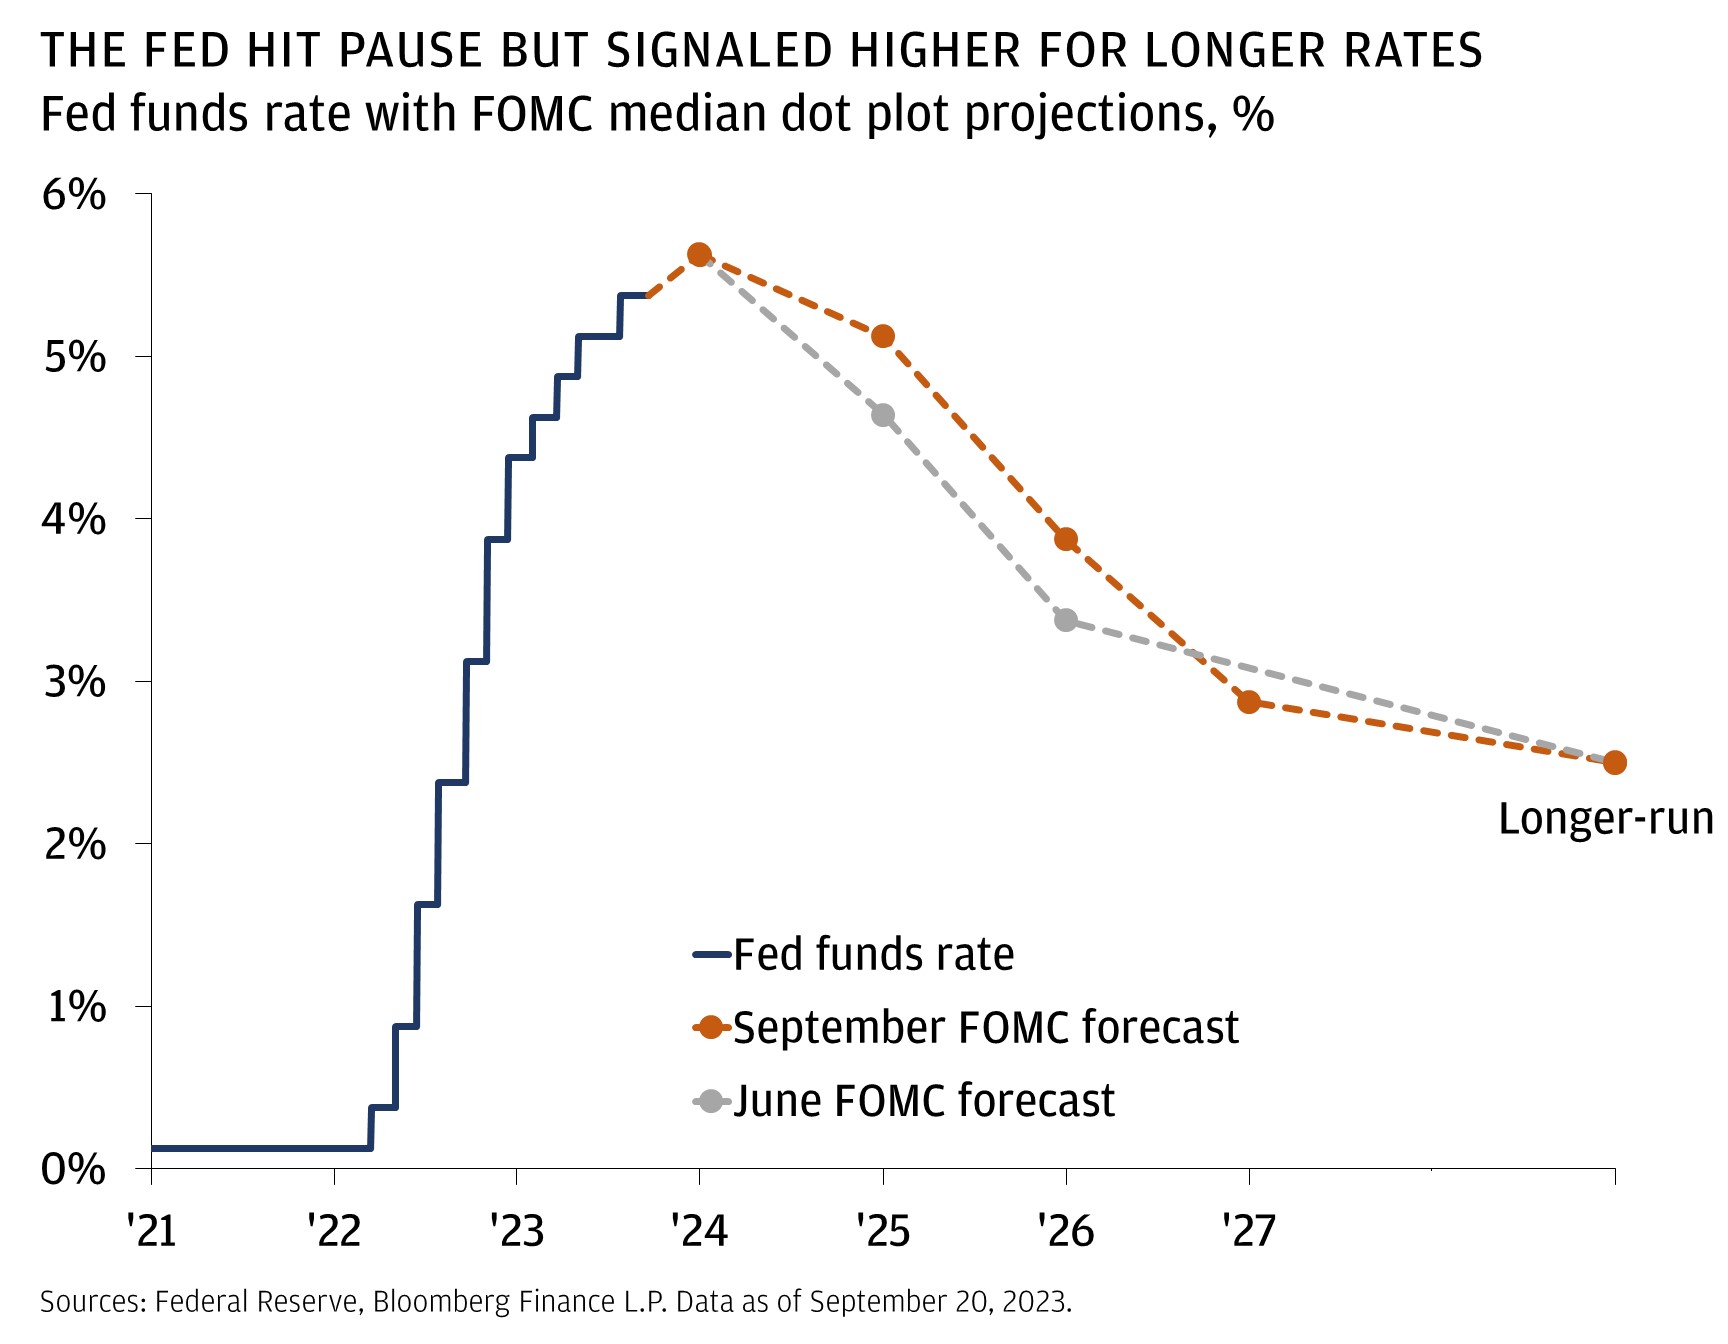 The Fed hit pause but signaled higher for longer RATES